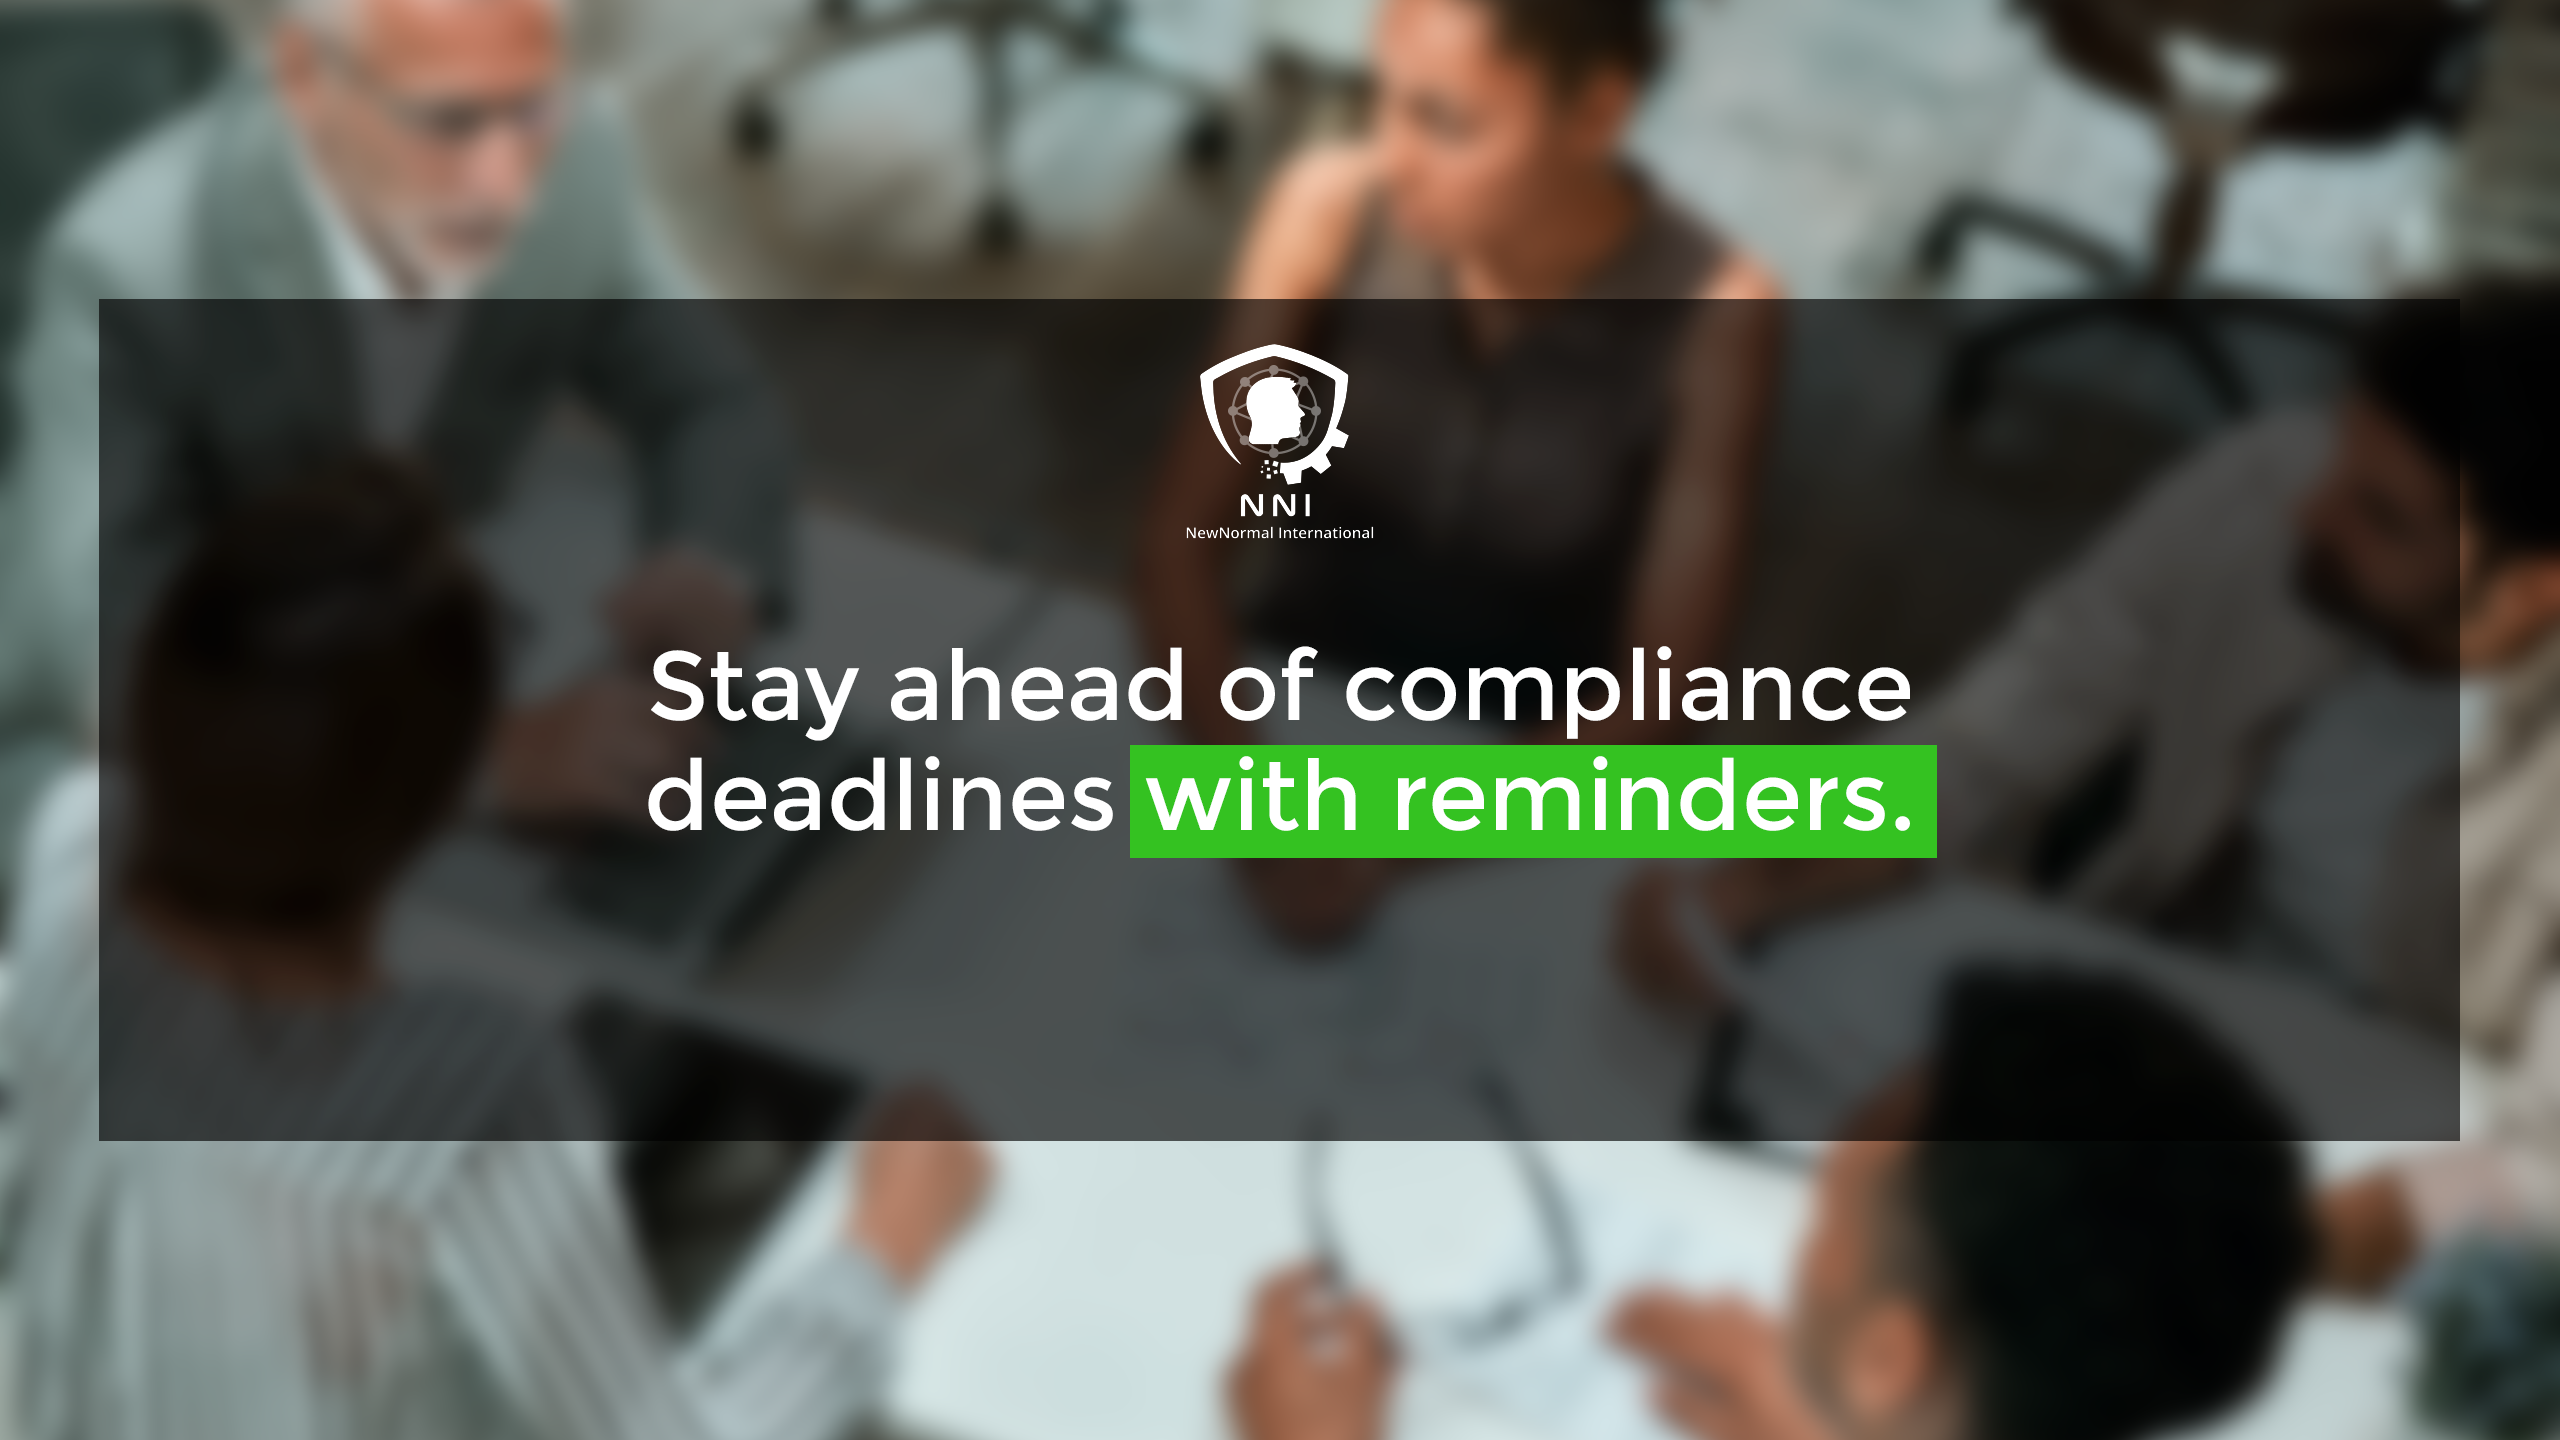 Stay ahead of compliance deadlines with reminders